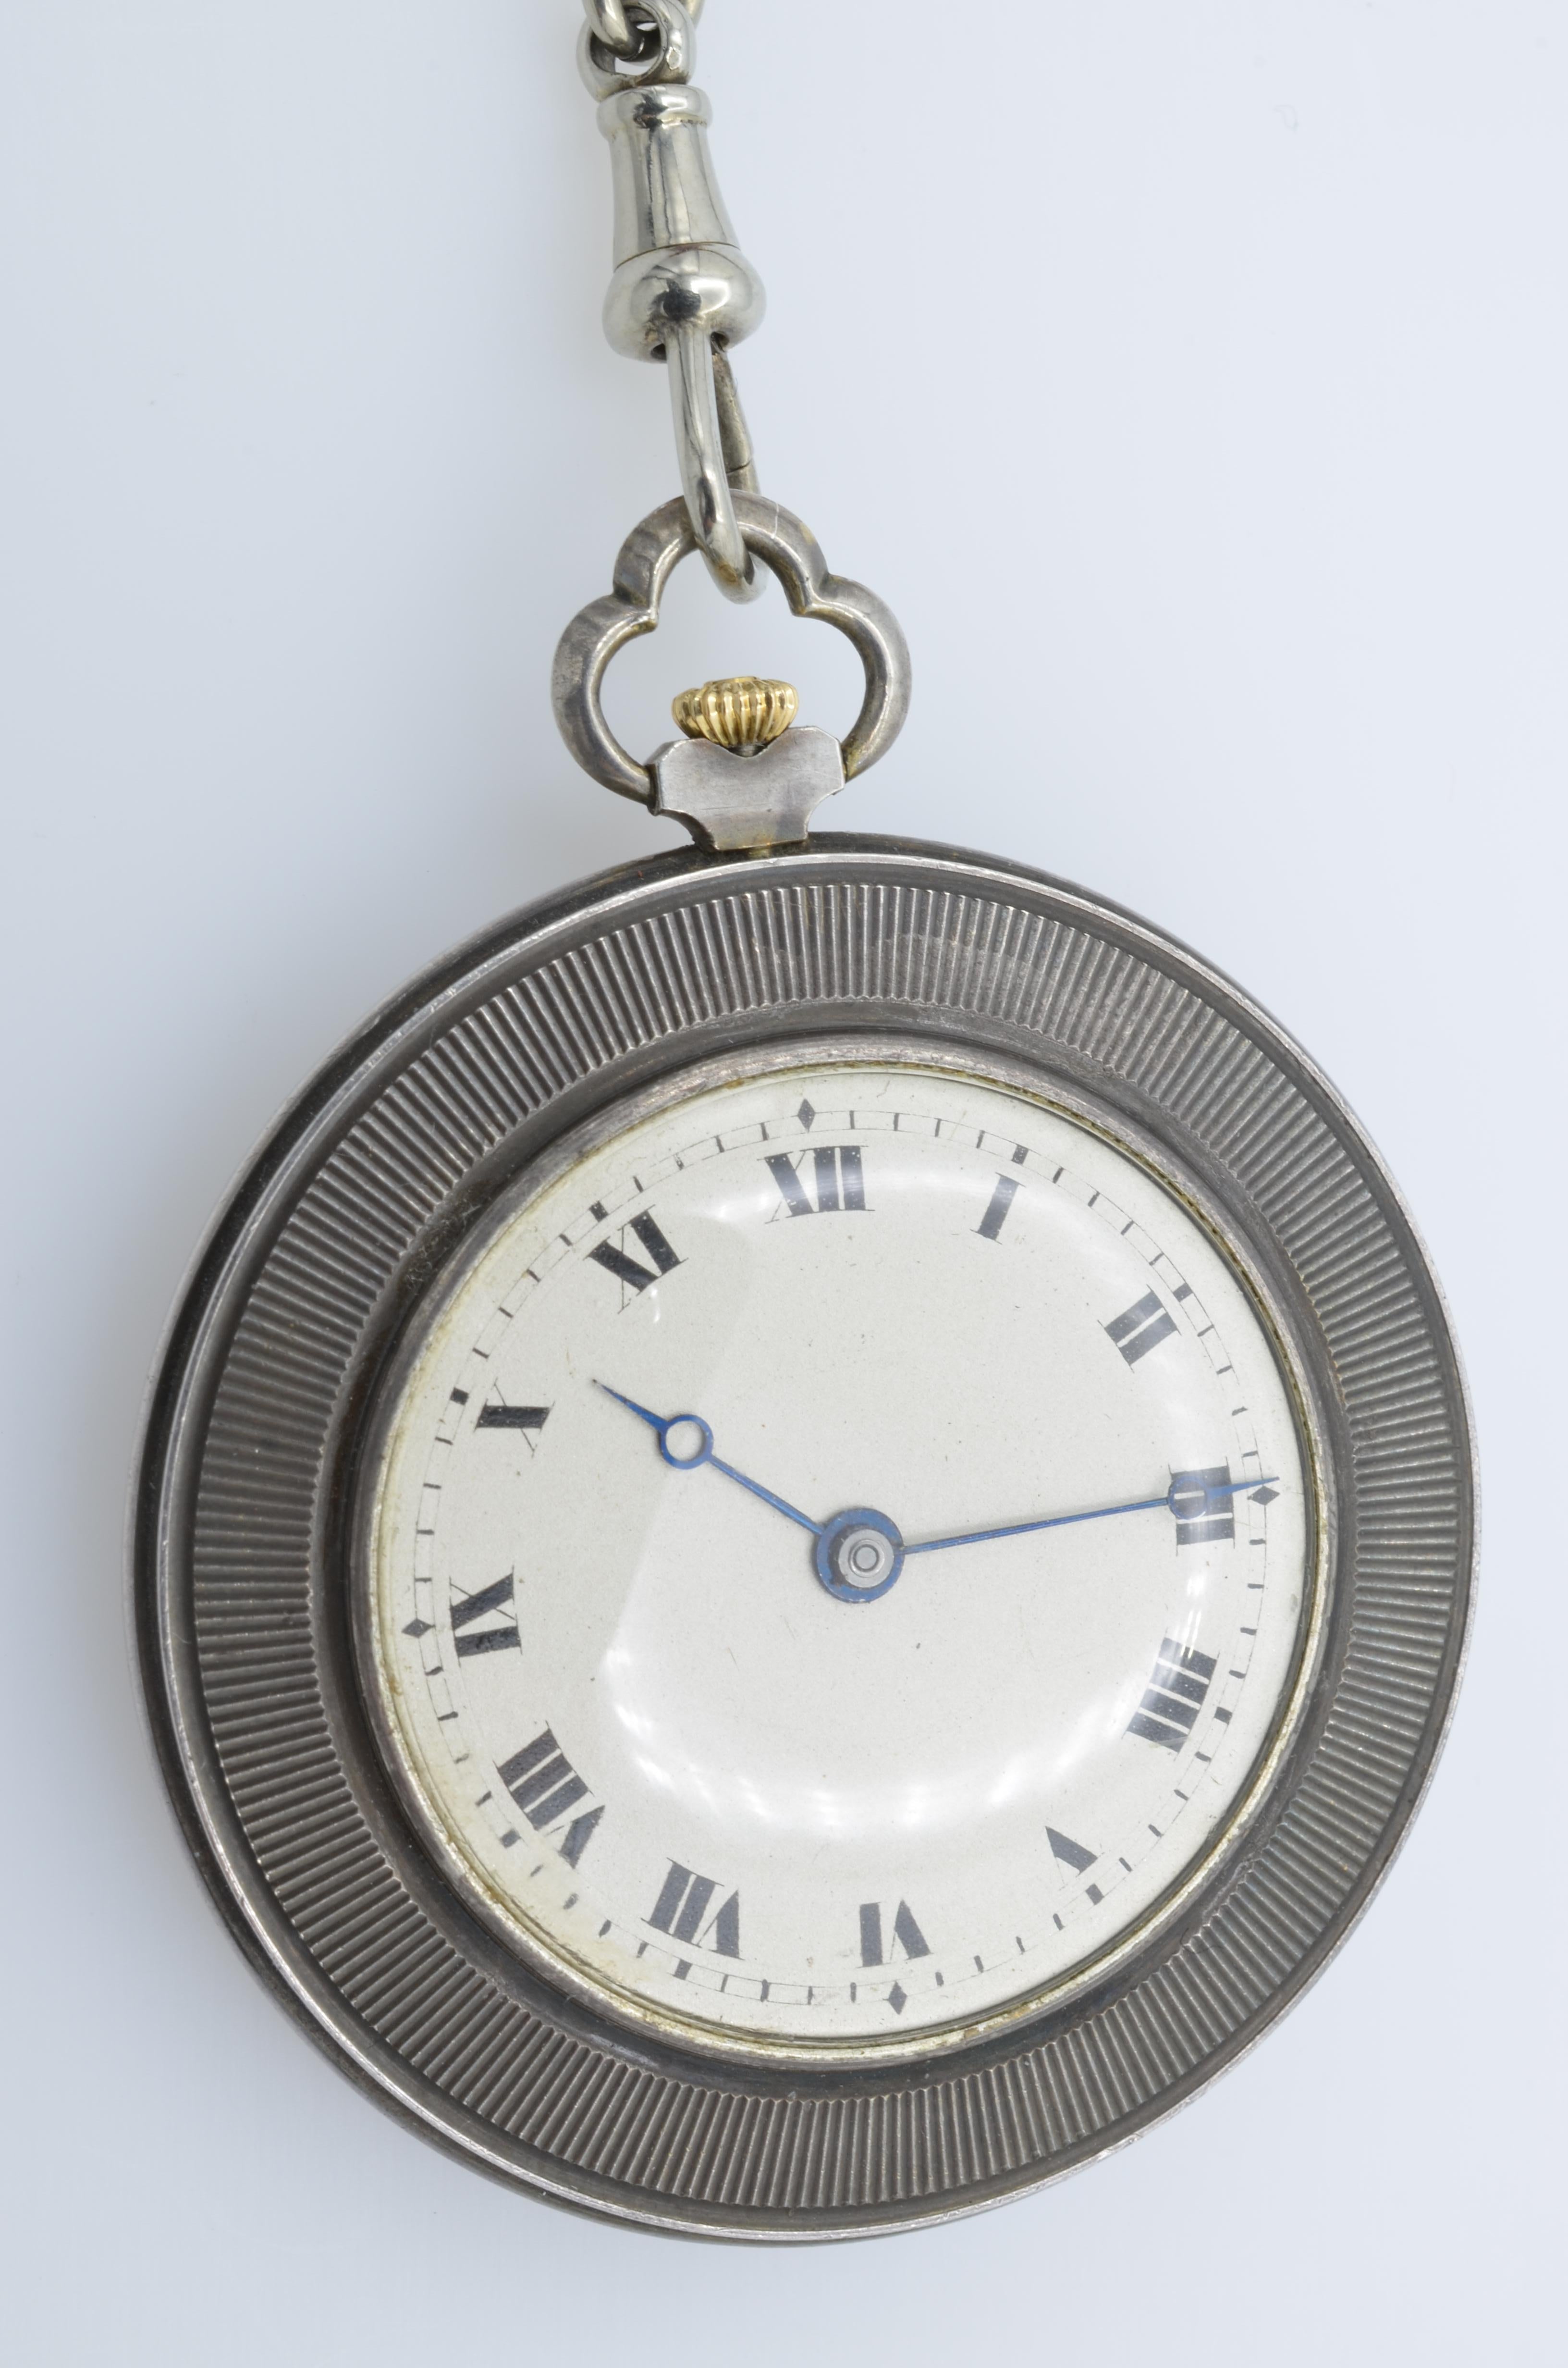 Lovely and chic pocket watch to the effigy of HRH Duke of Wellington, the date is around 1930. The watch has a very nice 